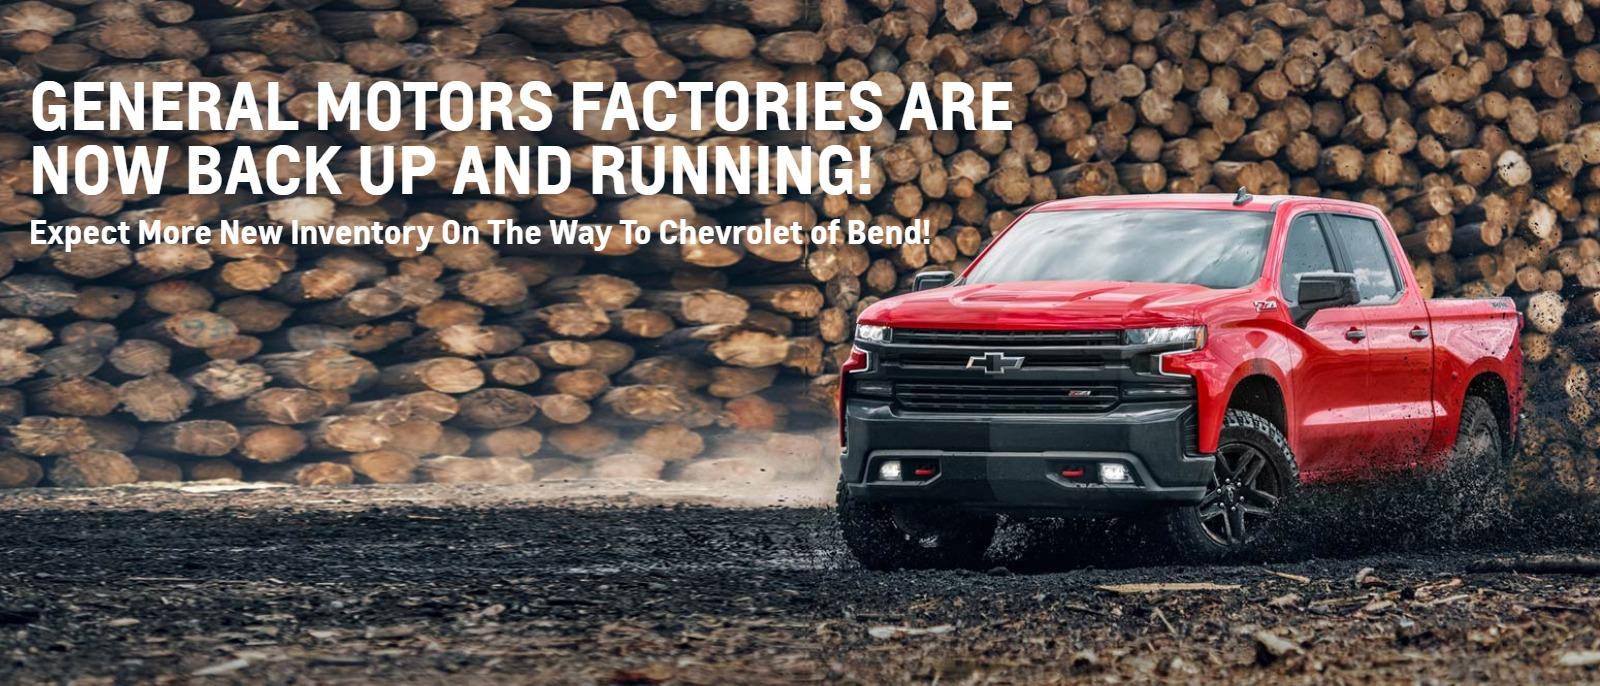 Expect More New Inventory On The Way To Chevrolet of Bend!